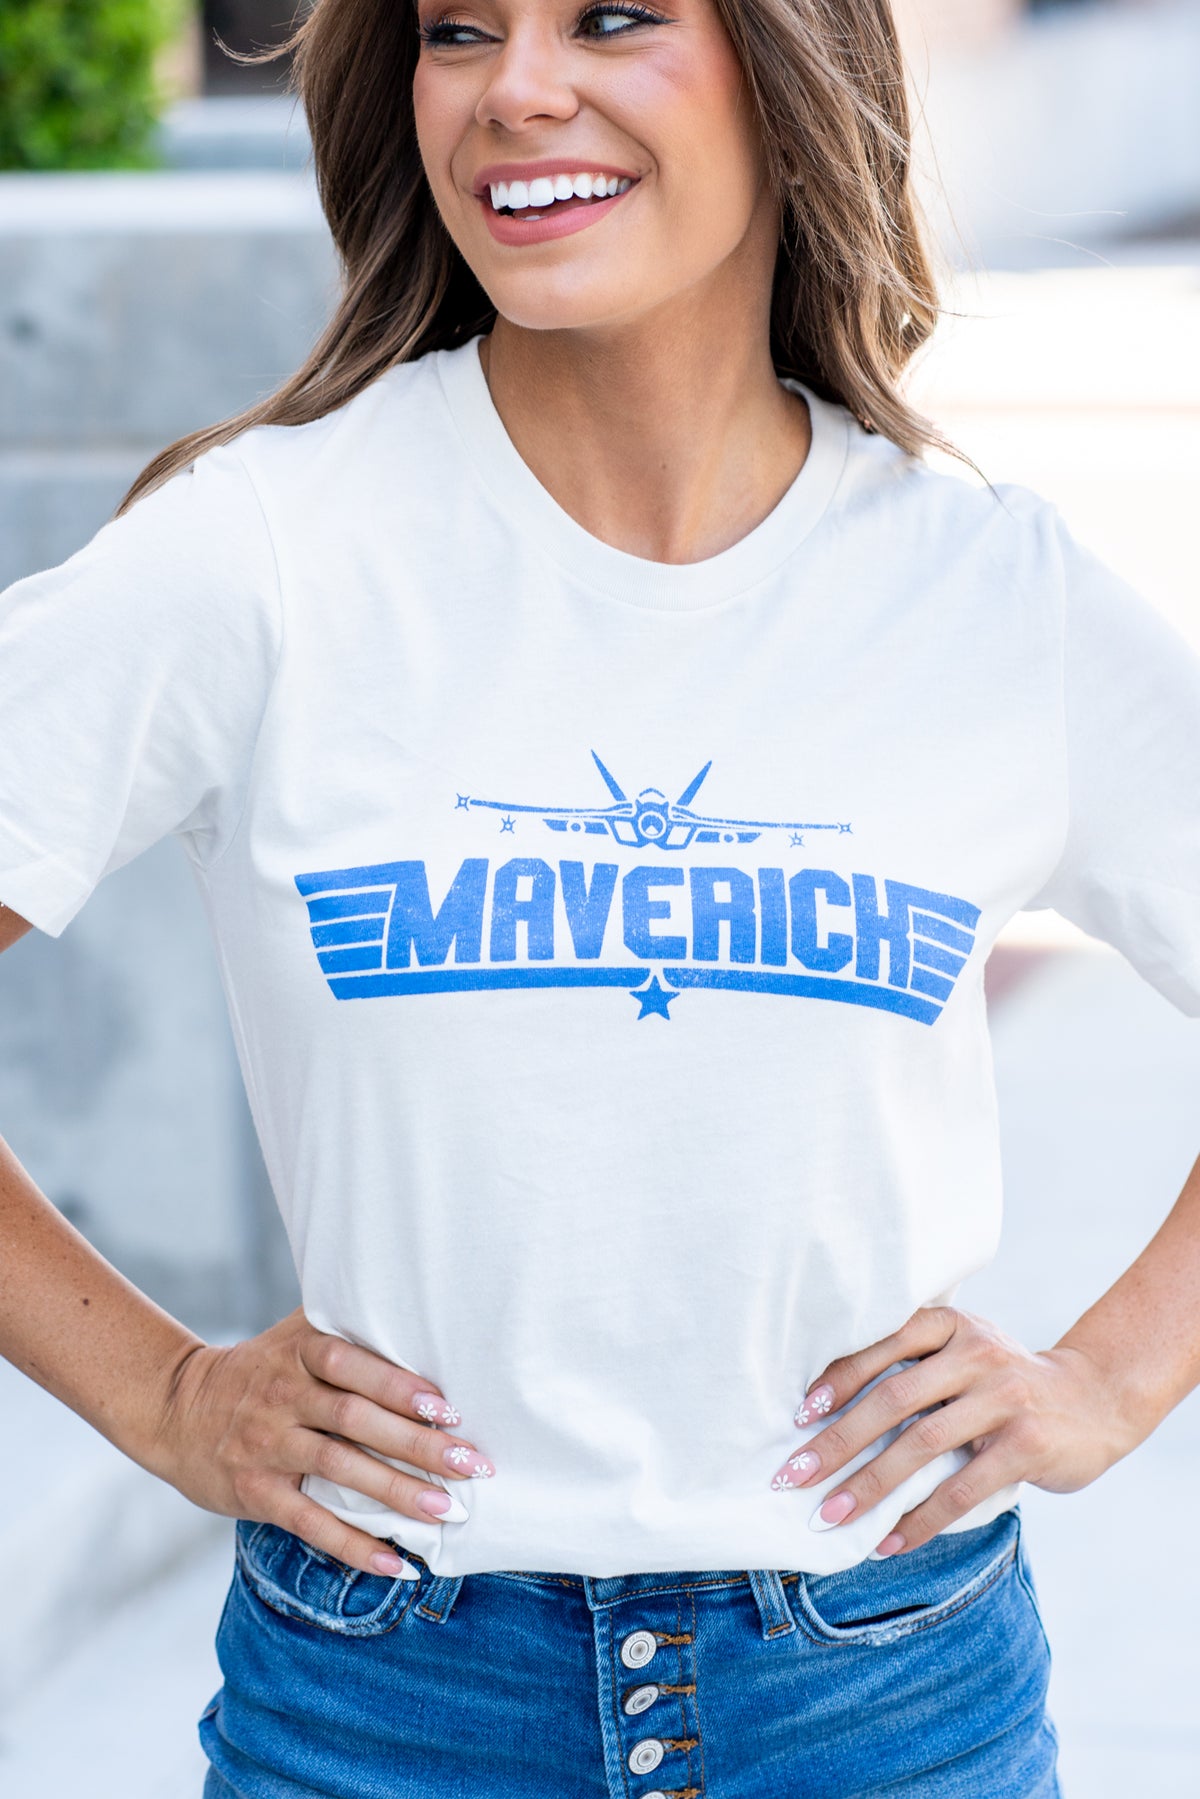 Maverick by Oat Collective   Graphic Tee   Color: Vintage White Neckline: Round   Sleeve: Short Sleeve  Fitted Tee 100% Premium Airlume combed cotton Style #: OT2206X777 Contact us for any additional measurements or sizing.    